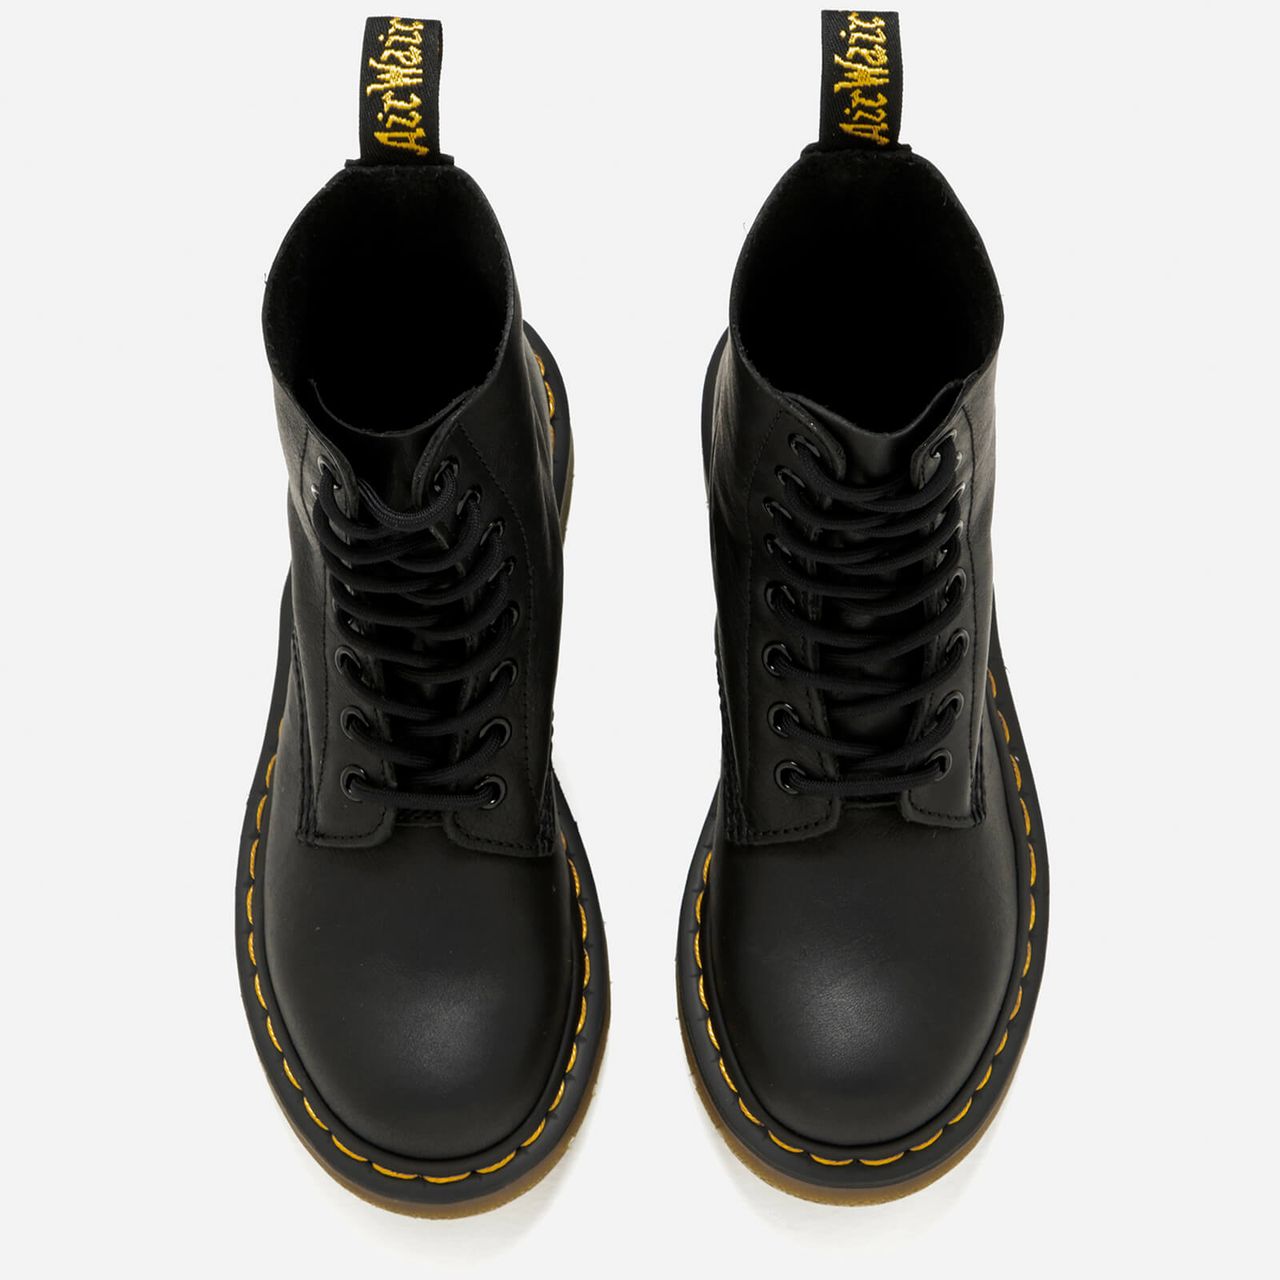 Dr. Martens Women's 1460 Pascal Virginia Leather 8-Eye Boots - Black - UK 3